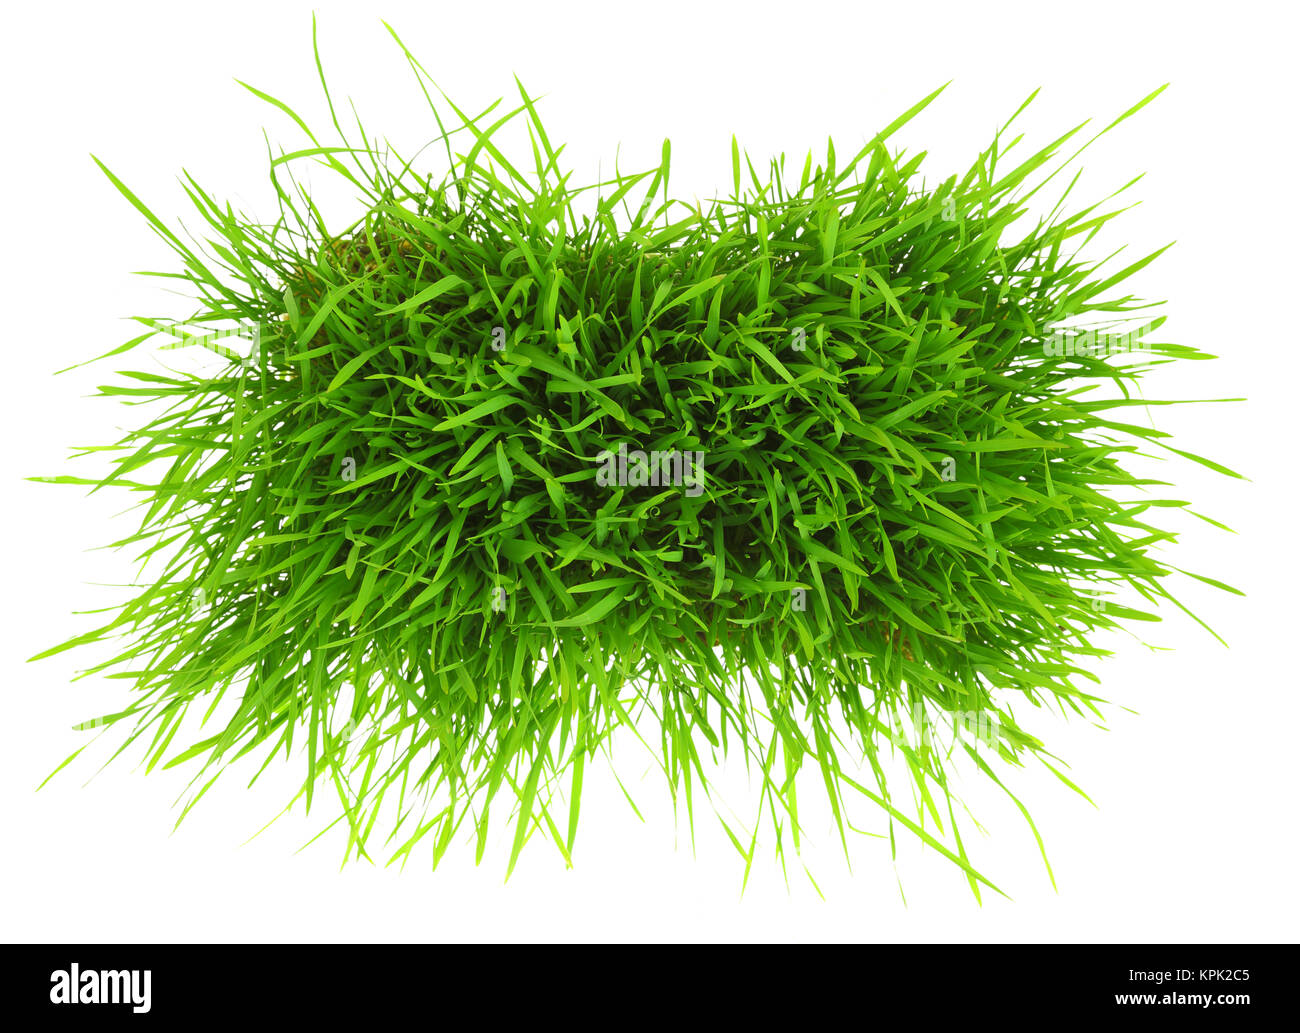 Patch of green grass isolated on white background Stock Photo